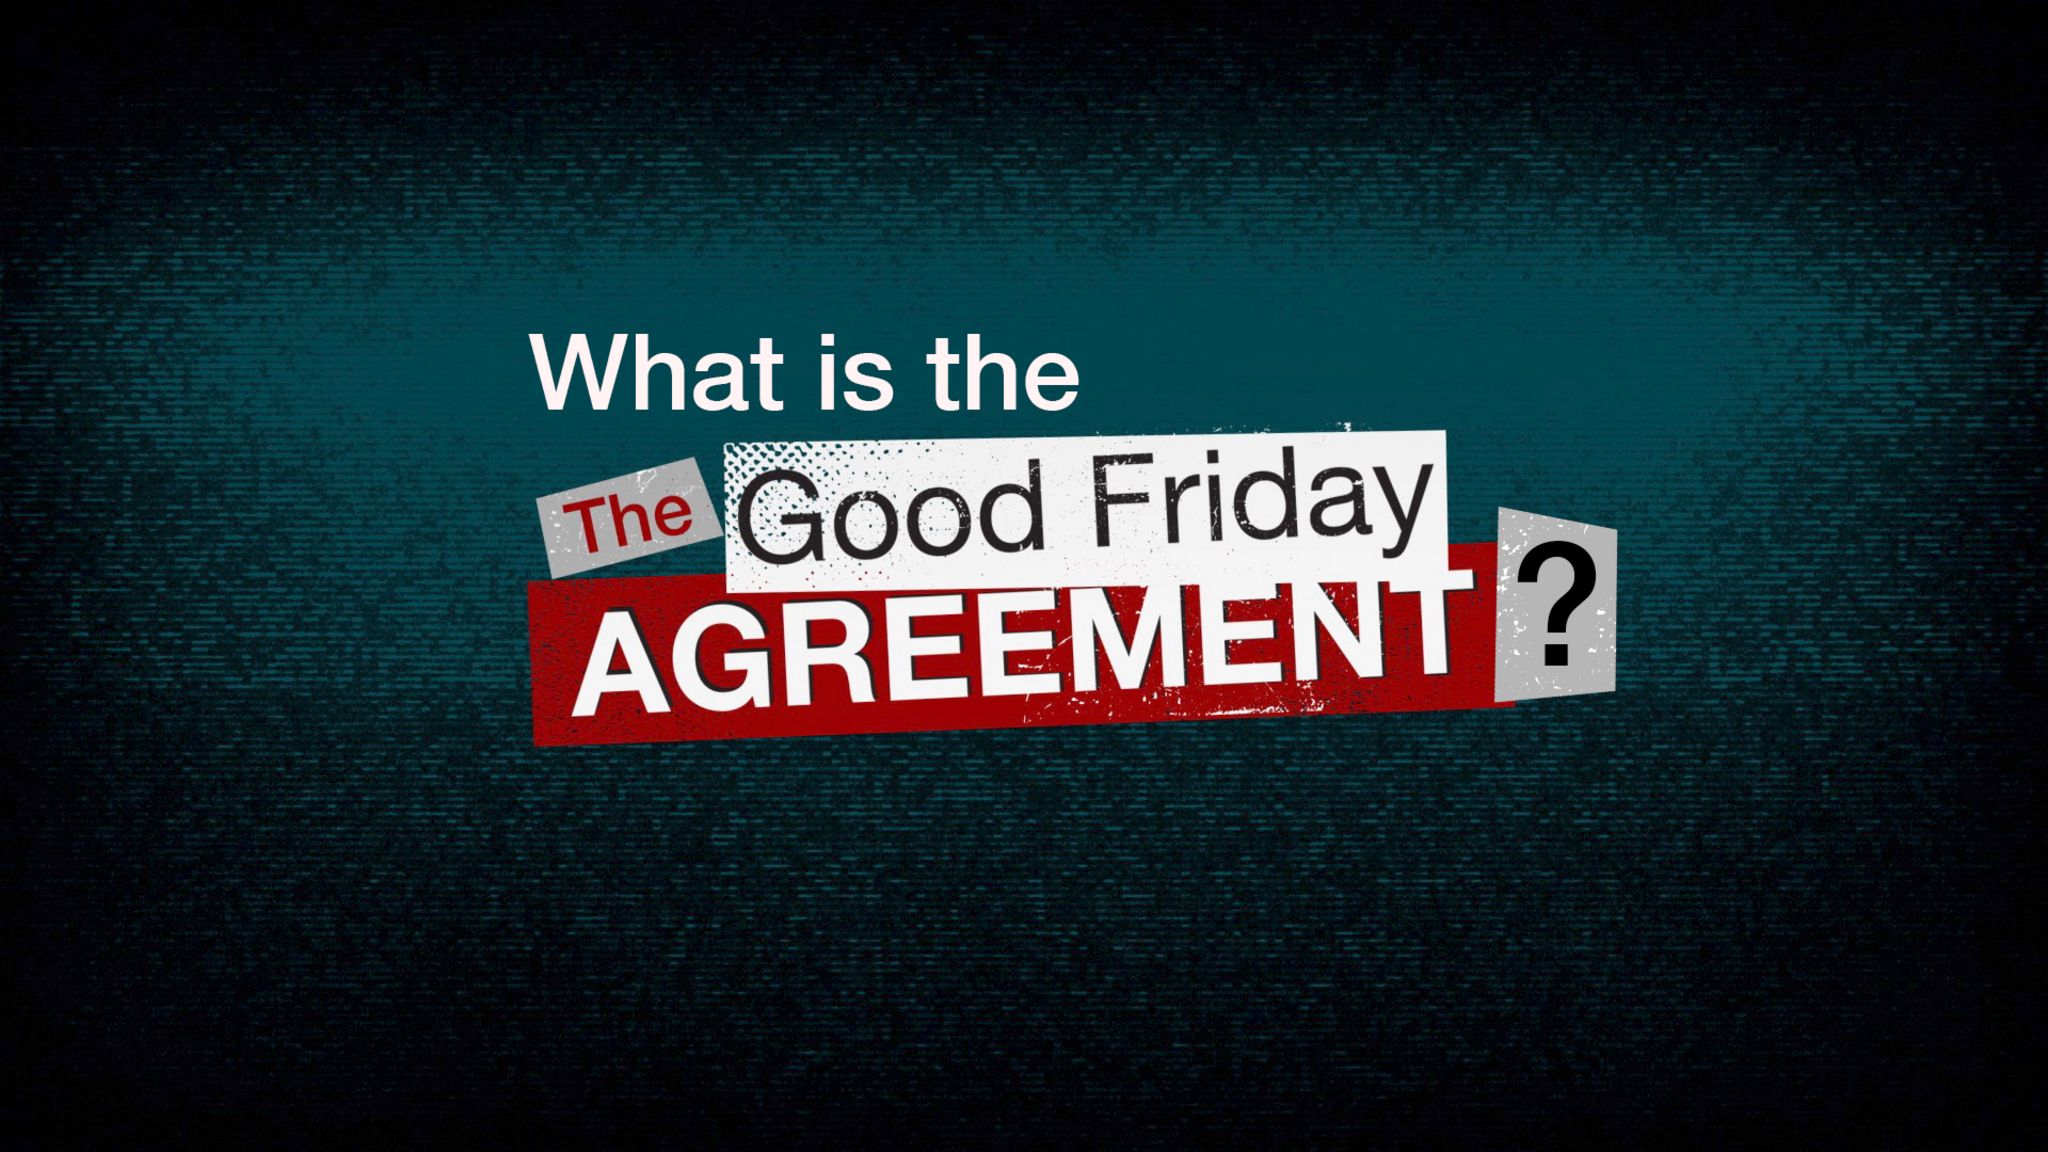 Do you know what the Good Friday Agreement is?